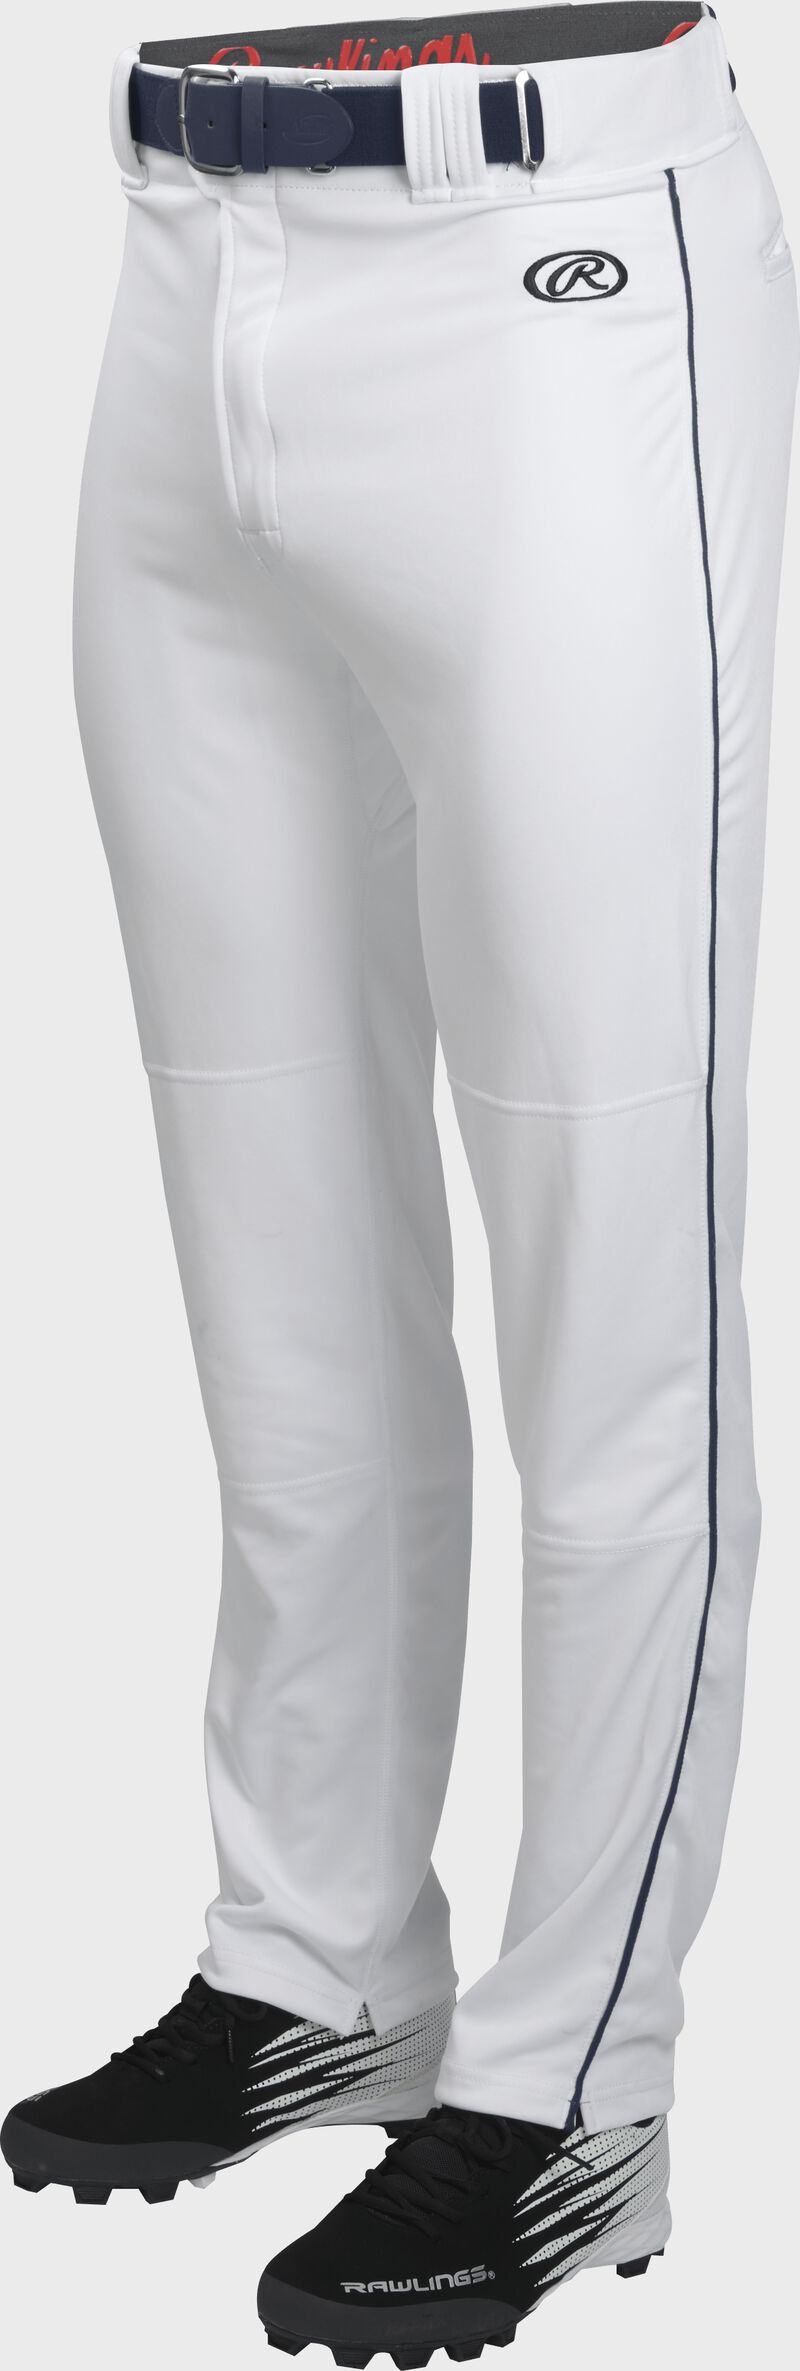 RAWLINGS YTH LAUNCH PANT PIPED (LNCHSRP) BS24